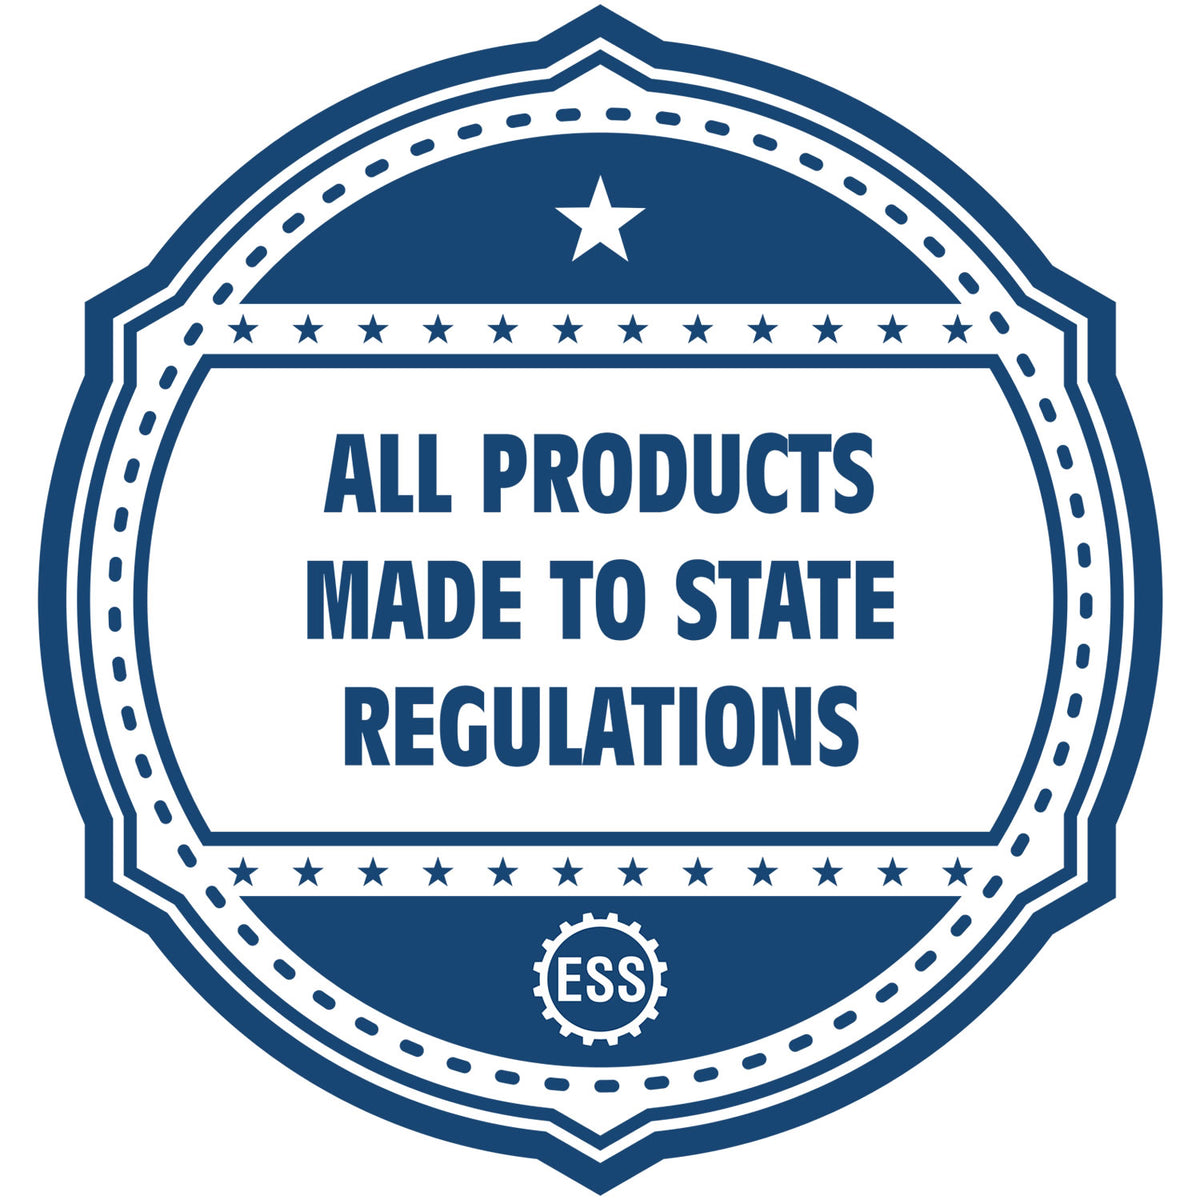 An icon or badge element for the Heavy-Duty California Rectangular Notary Stamp showing that this product is made in compliance with state regulations.